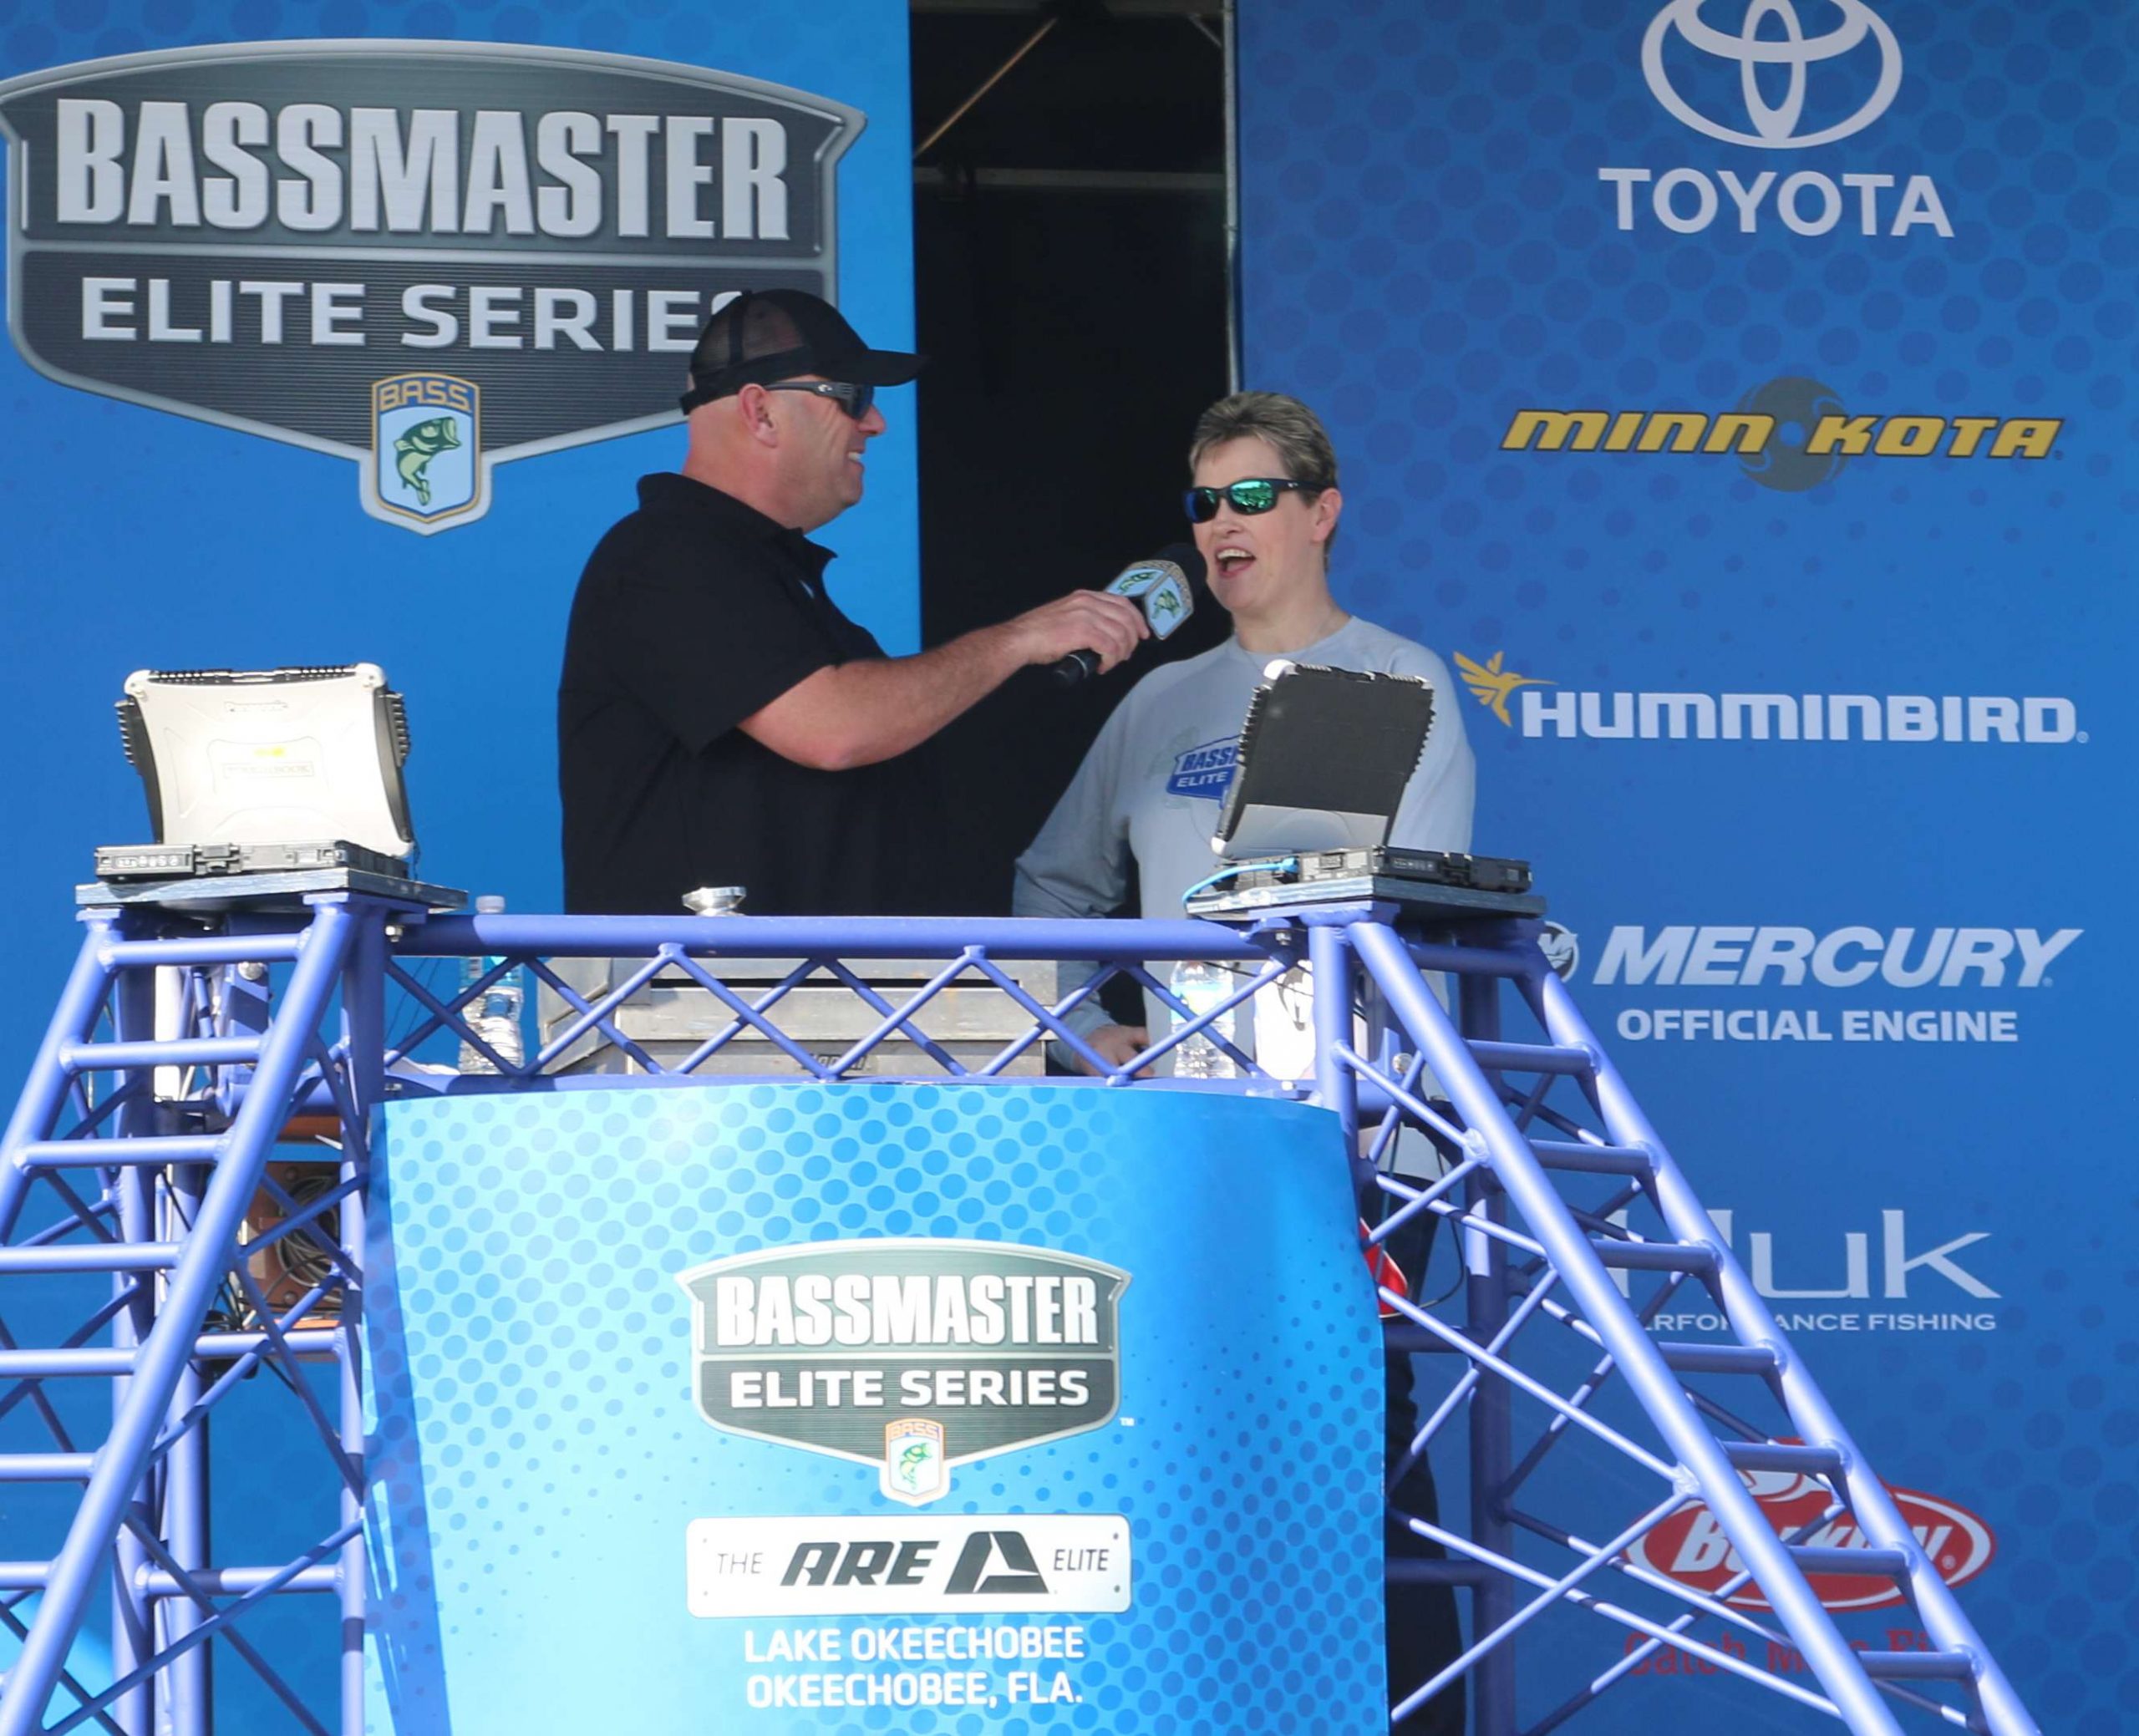 Ronda Conway, winner of the Fish with Bobby Lane sweepstakes sponsored by Visit Florida is introduced to the crowd at the Bassmaster Elite event final day weigh-in at Okeechobee, Fla.